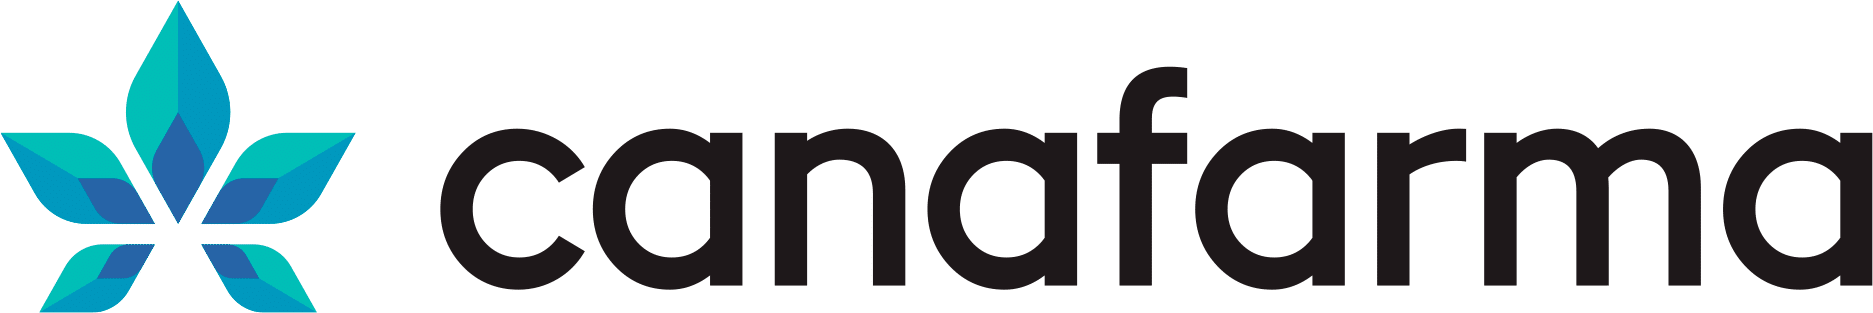 CanaFarma Hemp Products Corp. Announces Frank Barone as Its Chief Operating Officer